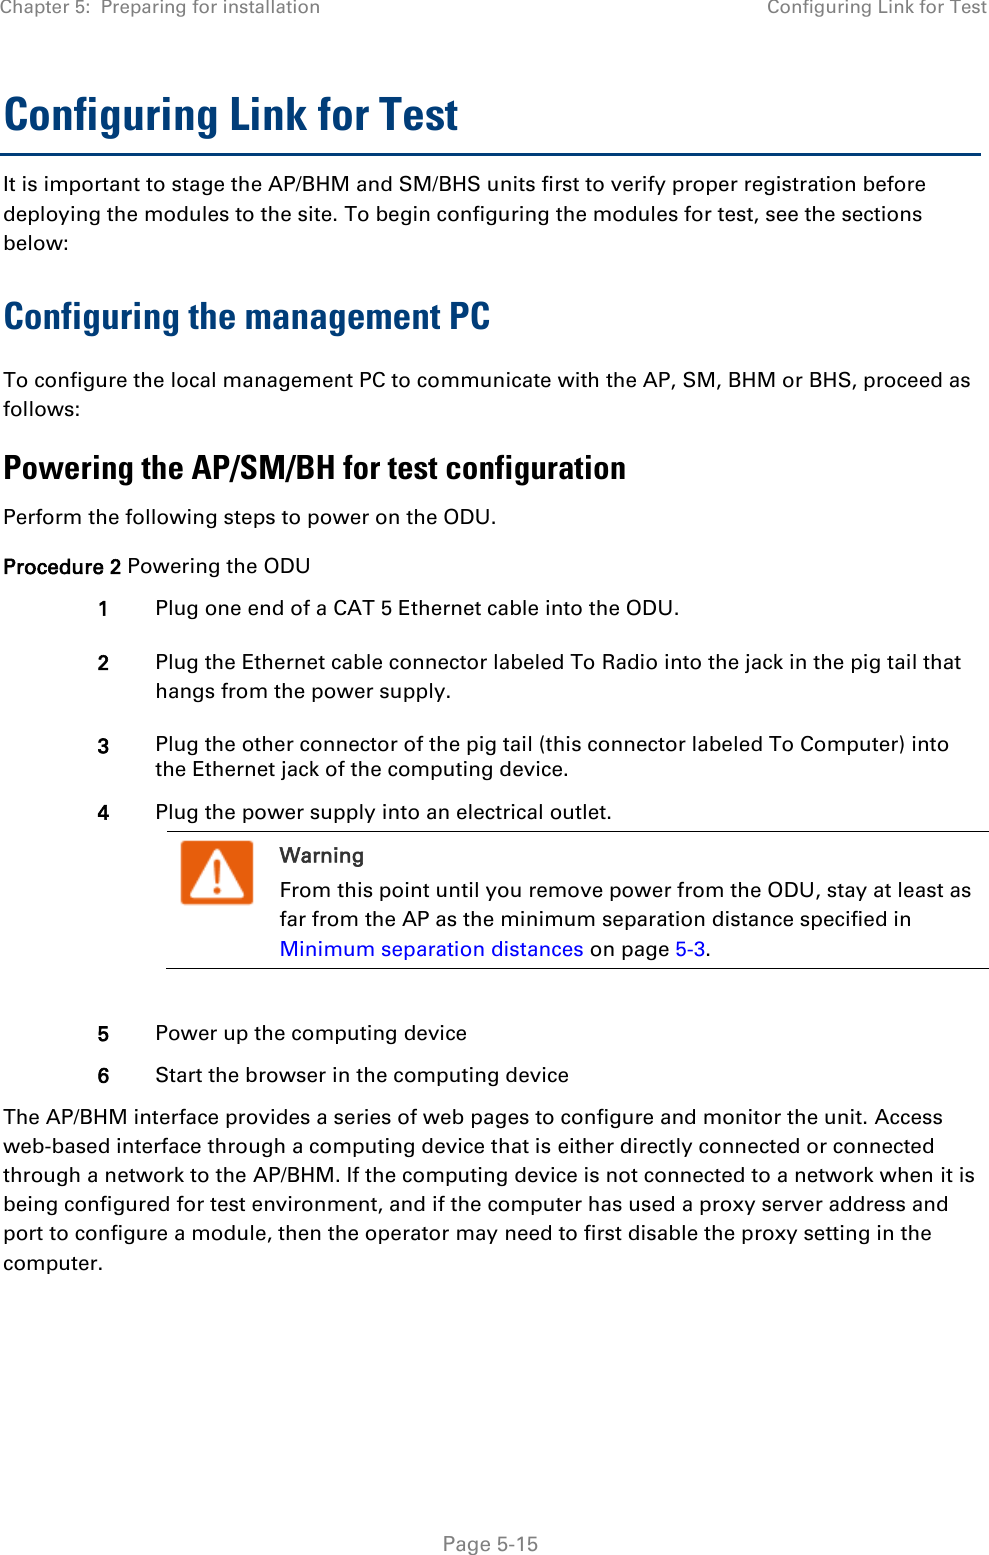 Chapter 5:  Preparing for installation Configuring Link for Test   Page 5-15 Configuring Link for Test It is important to stage the AP/BHM and SM/BHS units first to verify proper registration before deploying the modules to the site. To begin configuring the modules for test, see the sections below: Configuring the management PC To configure the local management PC to communicate with the AP, SM, BHM or BHS, proceed as follows: Powering the AP/SM/BH for test configuration Perform the following steps to power on the ODU. Procedure 2 Powering the ODU 1 Plug one end of a CAT 5 Ethernet cable into the ODU. 2 Plug the Ethernet cable connector labeled To Radio into the jack in the pig tail that hangs from the power supply. 3 Plug the other connector of the pig tail (this connector labeled To Computer) into the Ethernet jack of the computing device. 4 Plug the power supply into an electrical outlet.  Warning From this point until you remove power from the ODU, stay at least as far from the AP as the minimum separation distance specified in Minimum separation distances on page 5-3.   5 Power up the computing device 6 Start the browser in the computing device The AP/BHM interface provides a series of web pages to configure and monitor the unit. Access web-based interface through a computing device that is either directly connected or connected through a network to the AP/BHM. If the computing device is not connected to a network when it is being configured for test environment, and if the computer has used a proxy server address and port to configure a module, then the operator may need to first disable the proxy setting in the computer.      